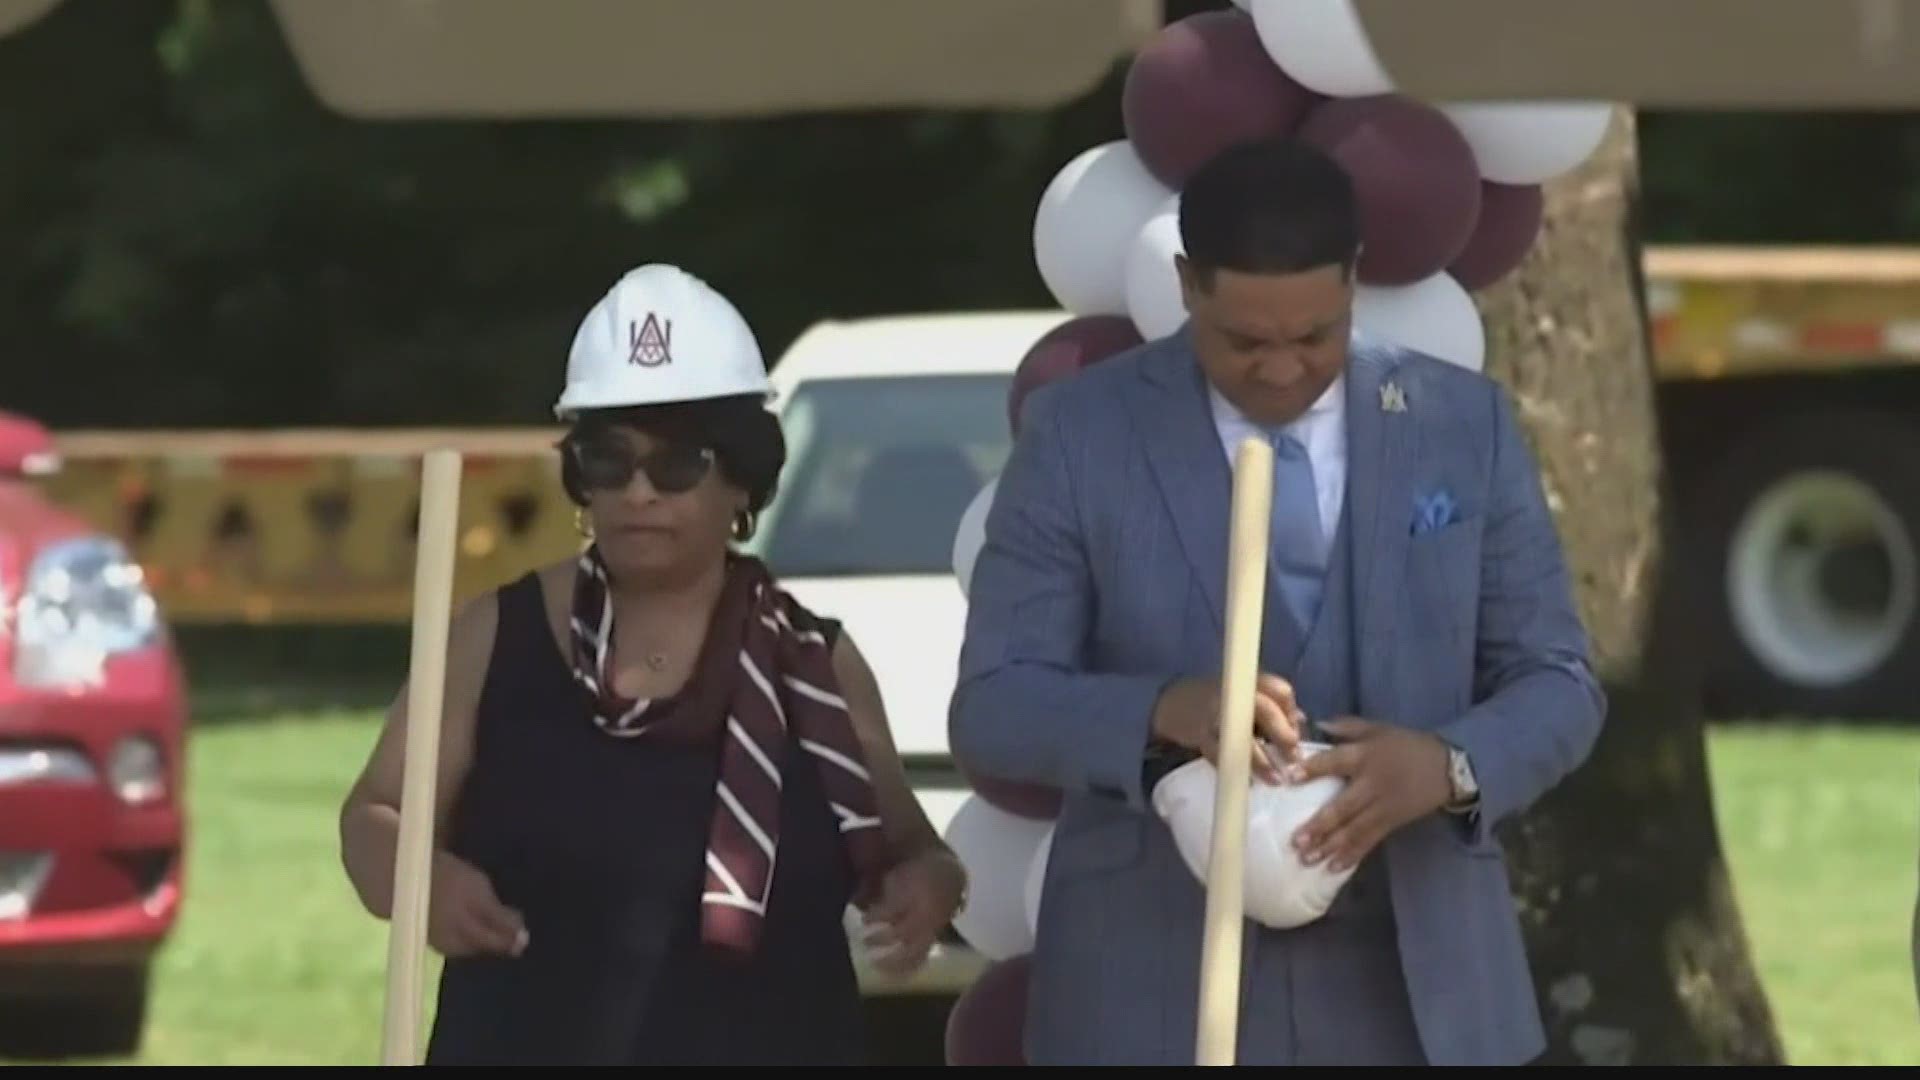 Alabama A&M is breaking ground, marking a new building that school officials say will serve as the ‘front door’ of the University.